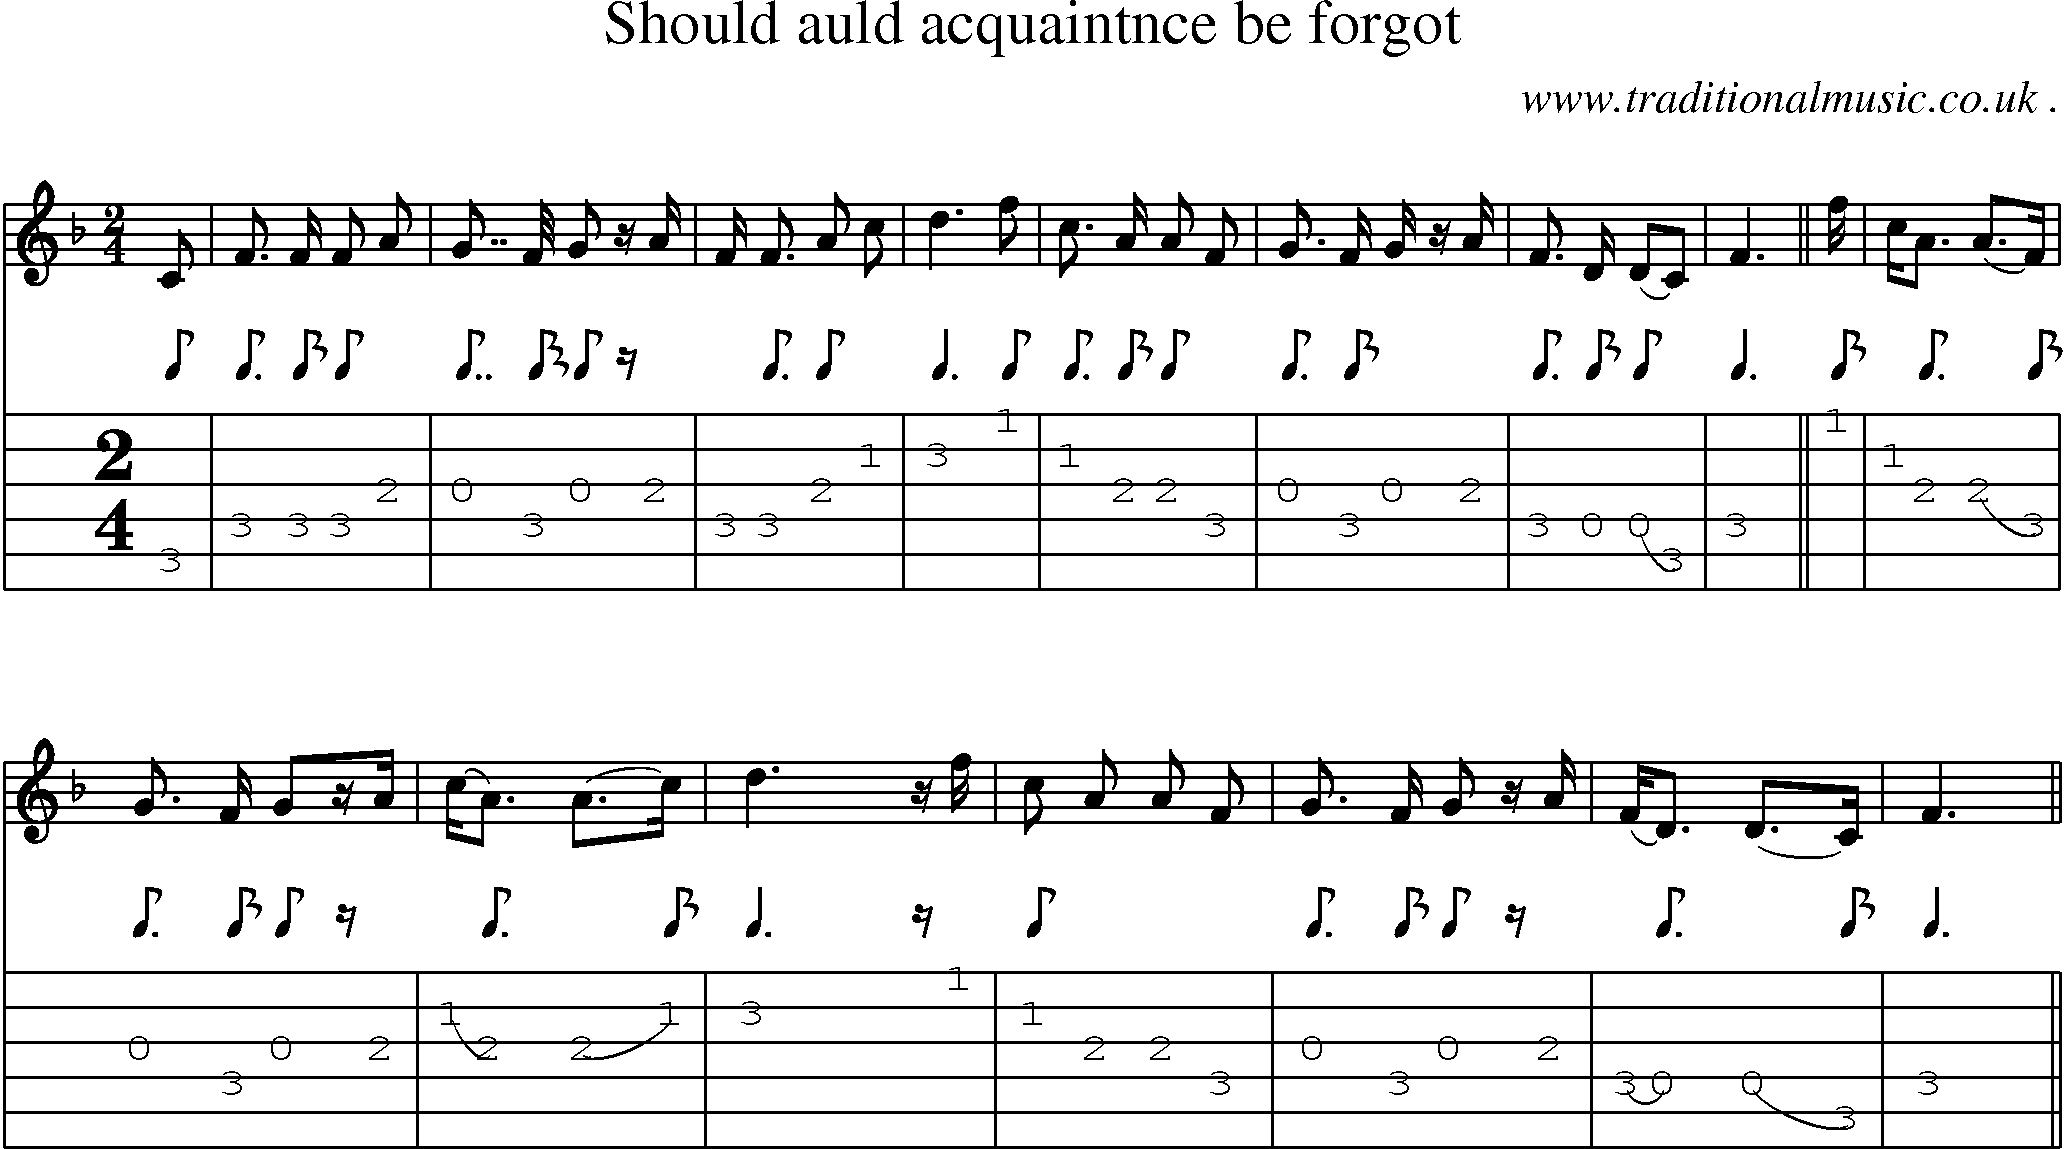 Sheet-Music and Guitar Tabs for Should Auld Acquaintnce Be Forgot